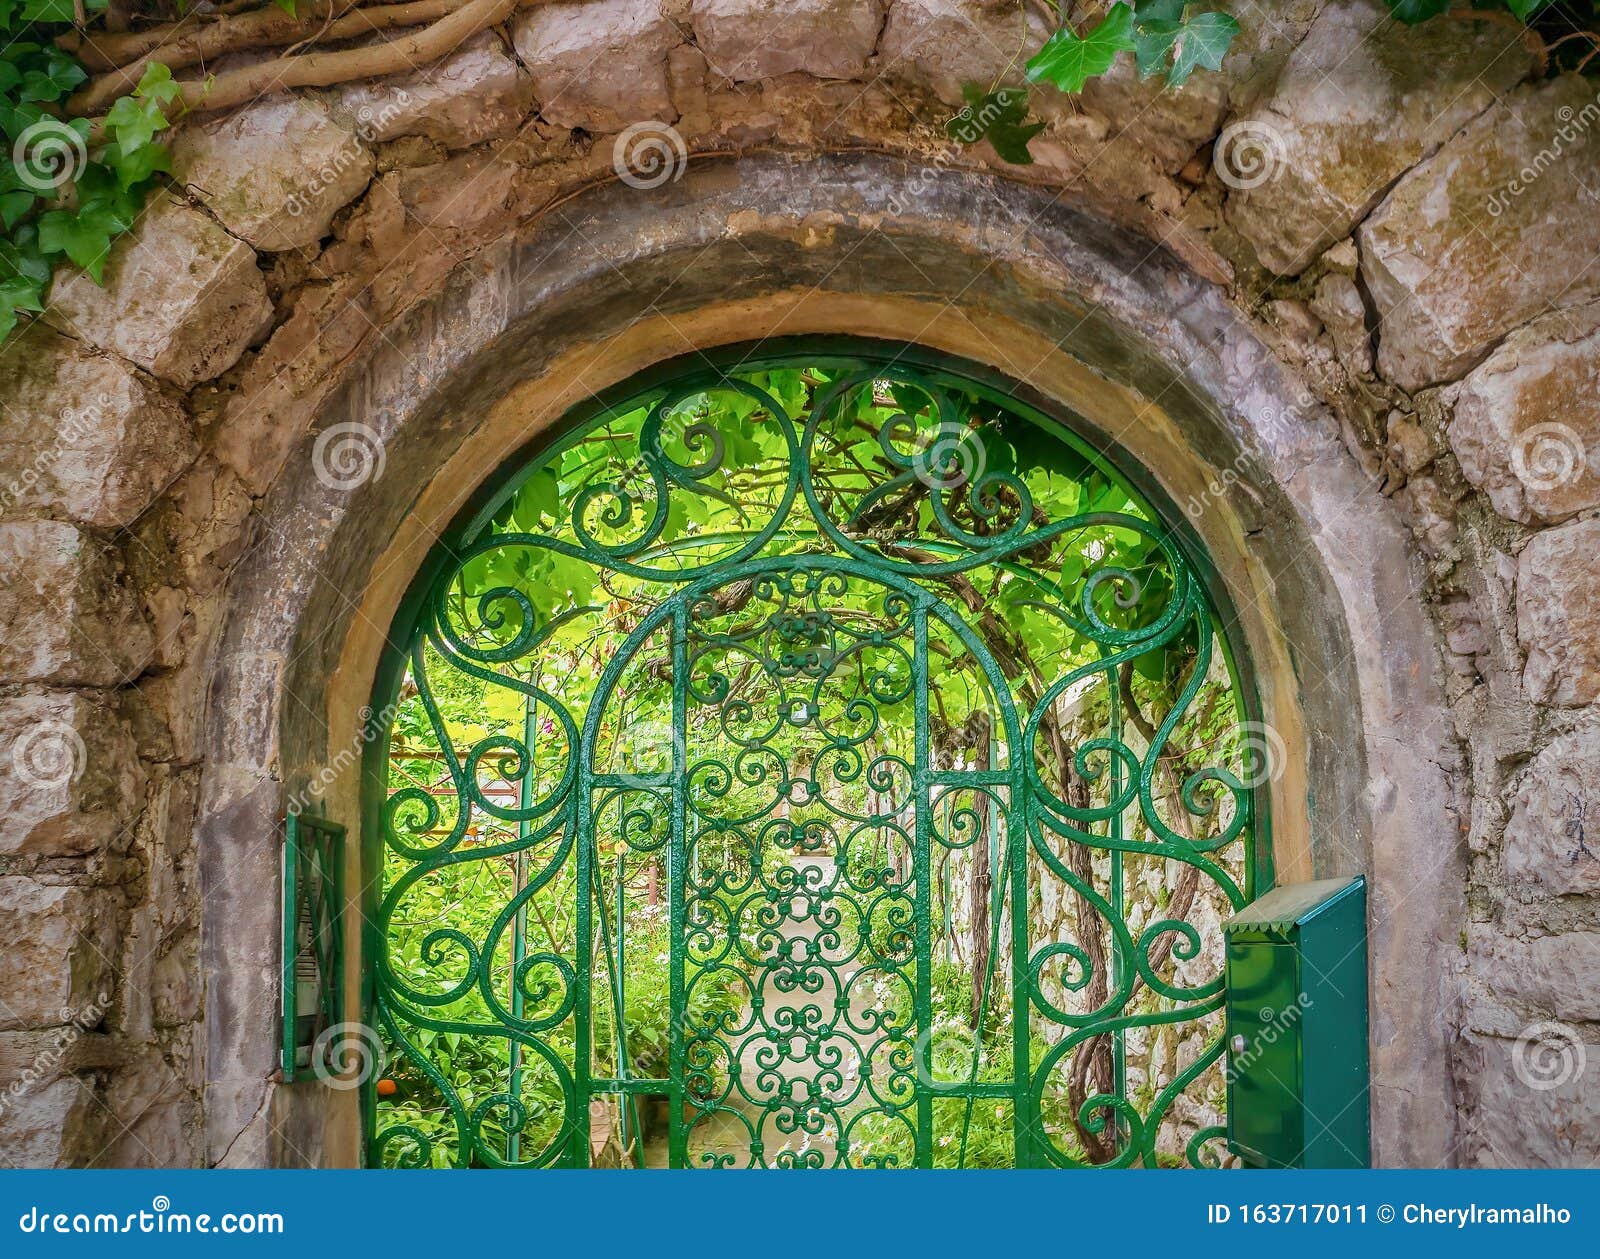 Pretty Iron Gate Leading To A Green Summer Garden Stock Image